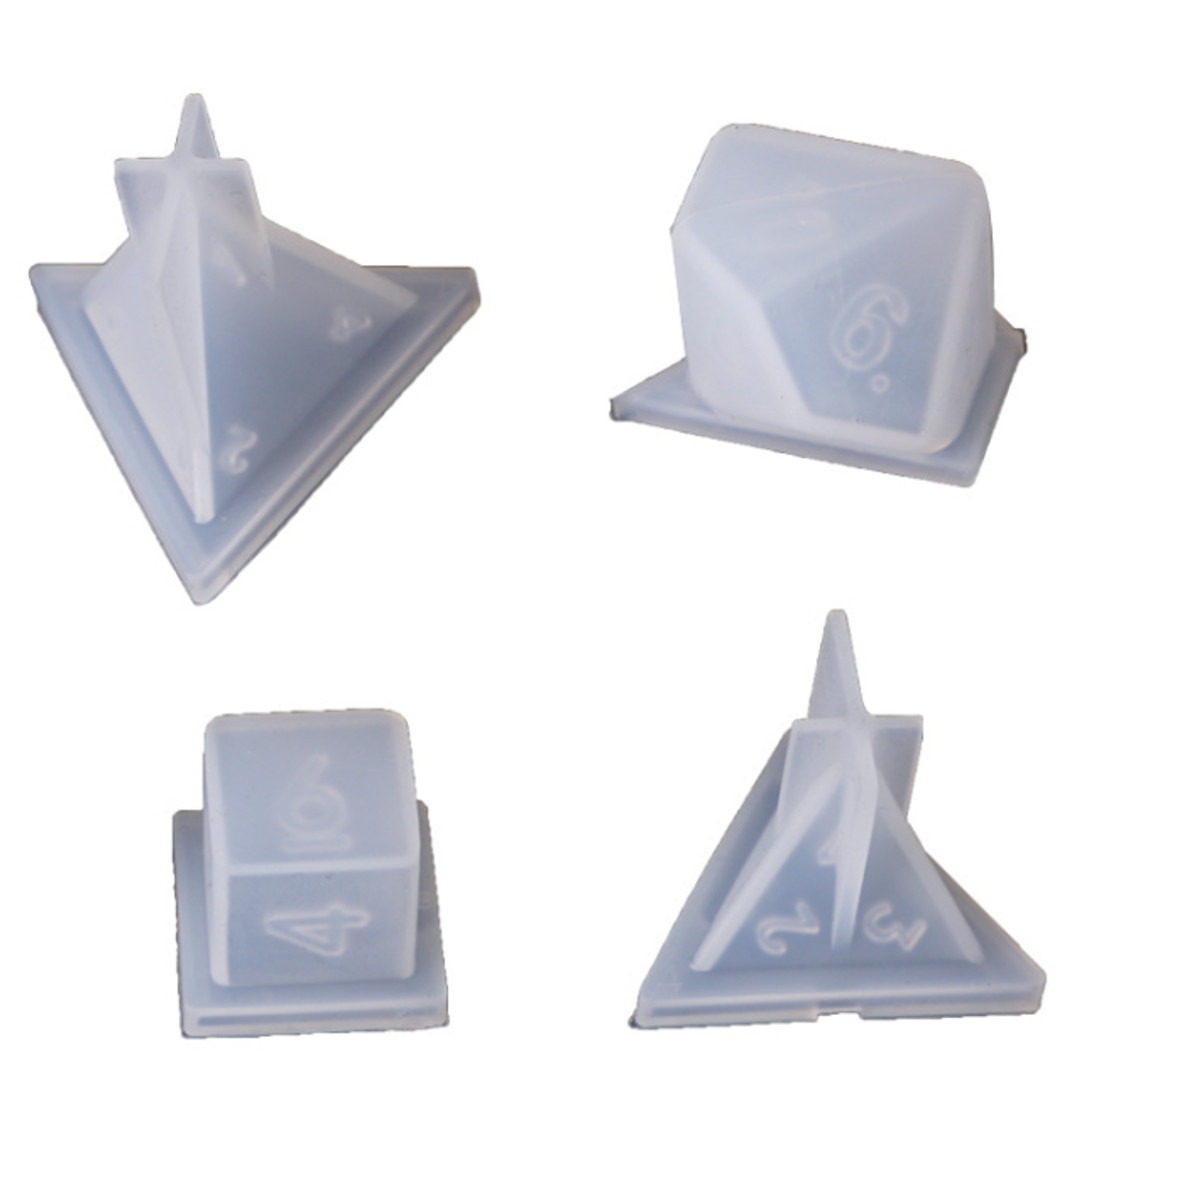 719PcsSet-Dice-Fillet-Square-Triangle-Dice-Mold-Dice-Digital-Game-Silicone-Mould-1626418